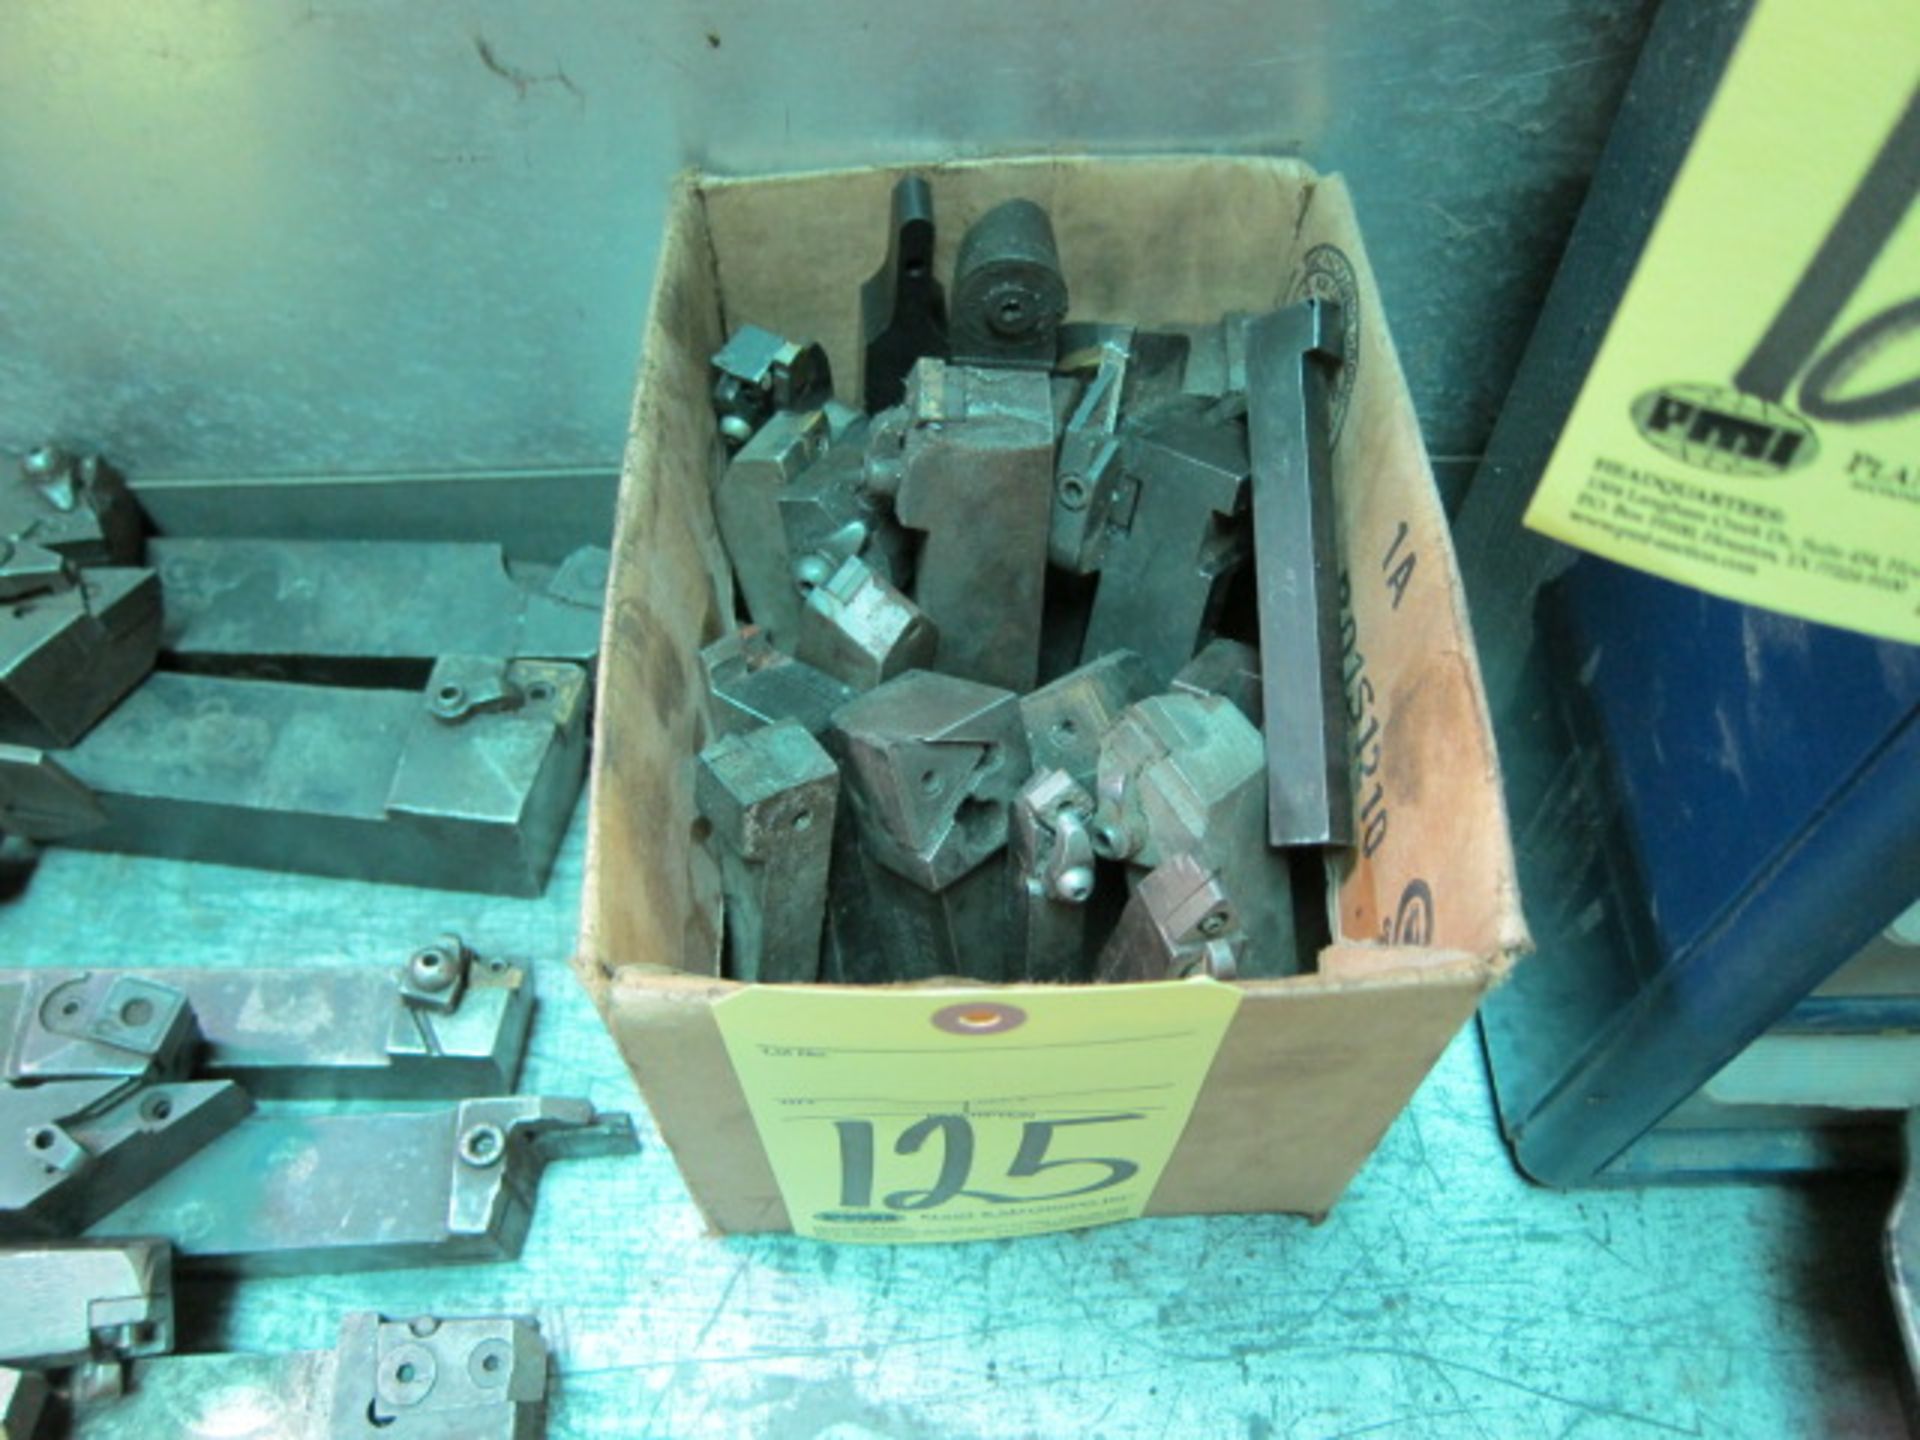 LOT OF INSERT TOOLHOLDERS, assorted (in one box)